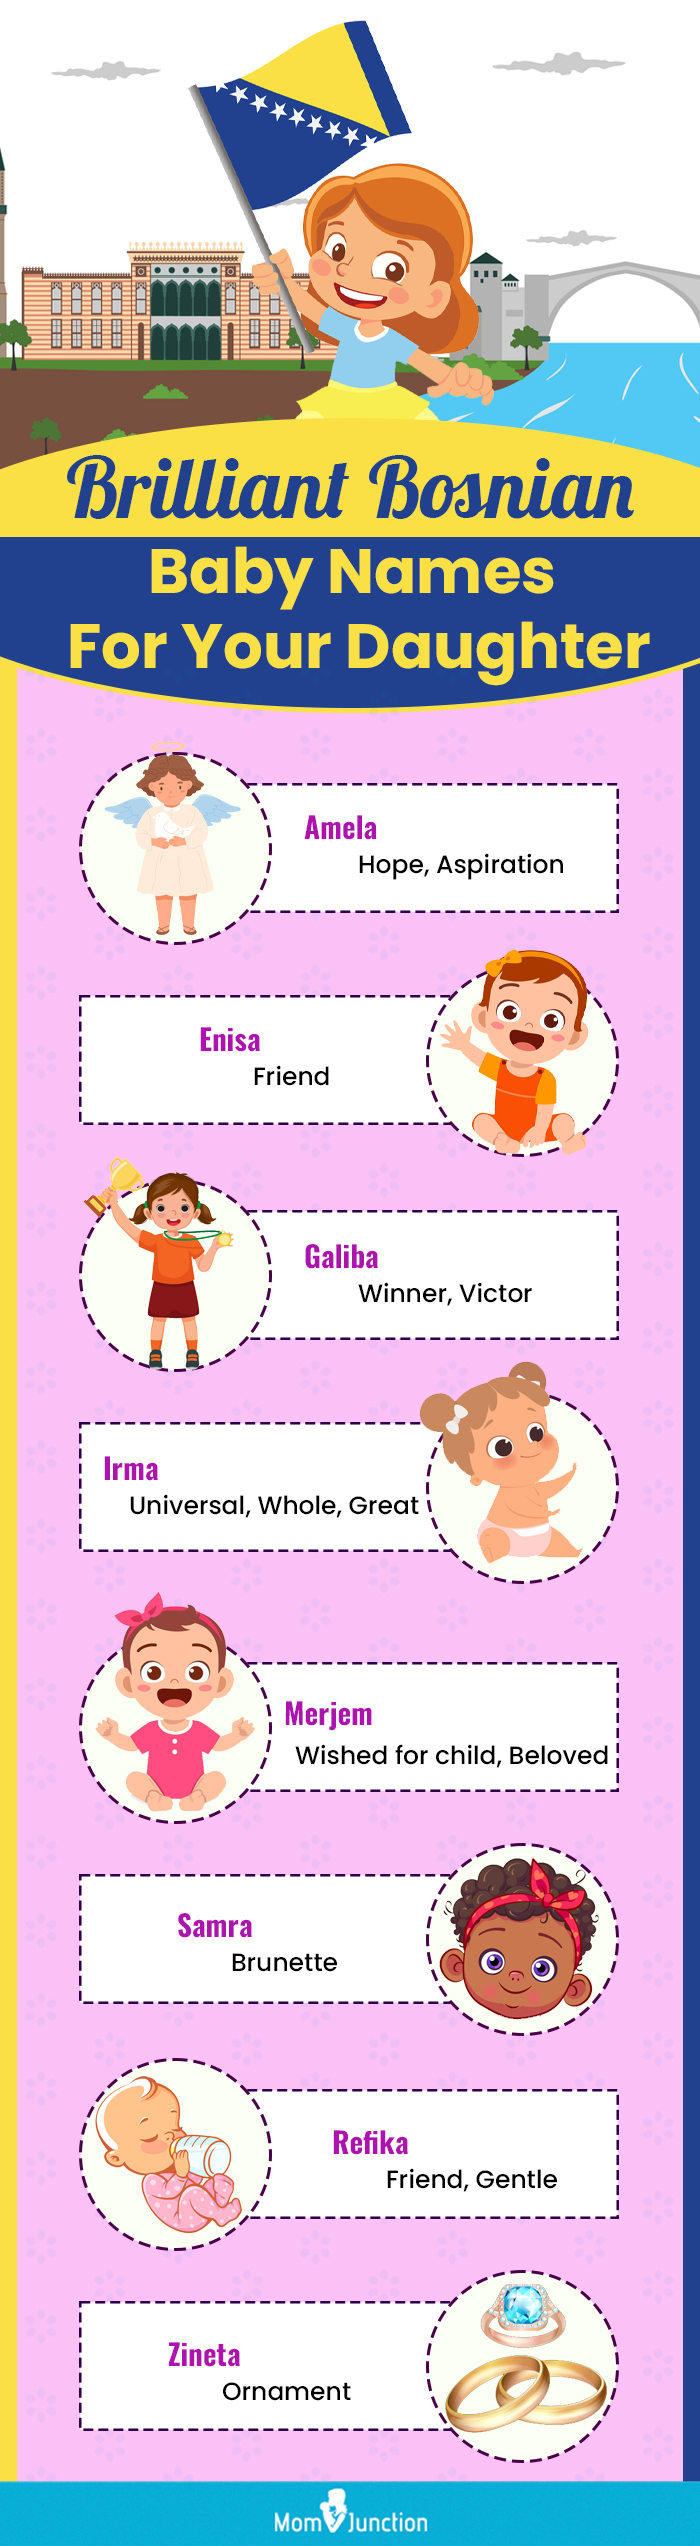 brilliant bosnian baby names for your daughter (infographic)